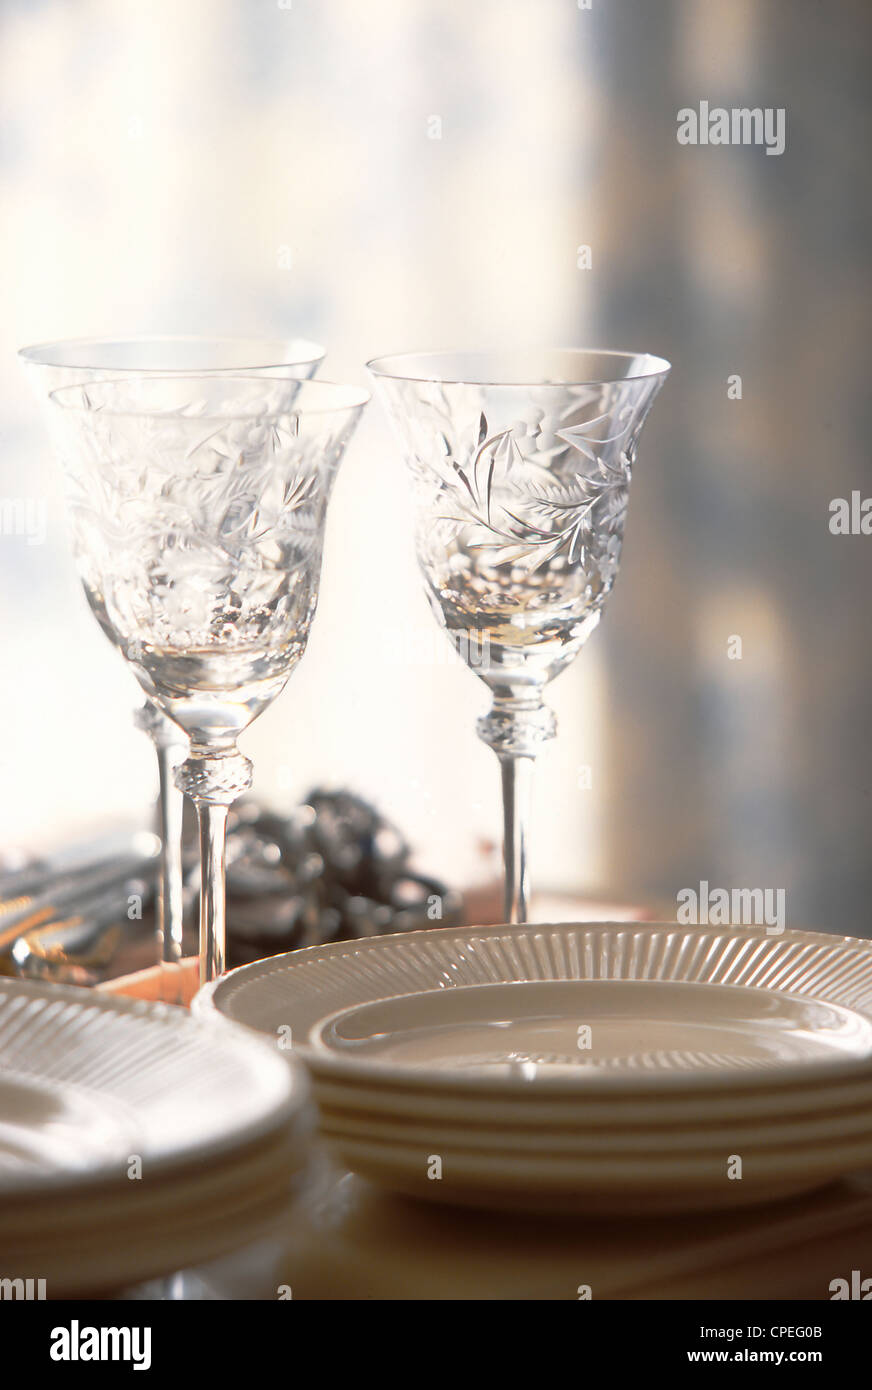 Empty Drinking Glasses And Plates Stock Photo